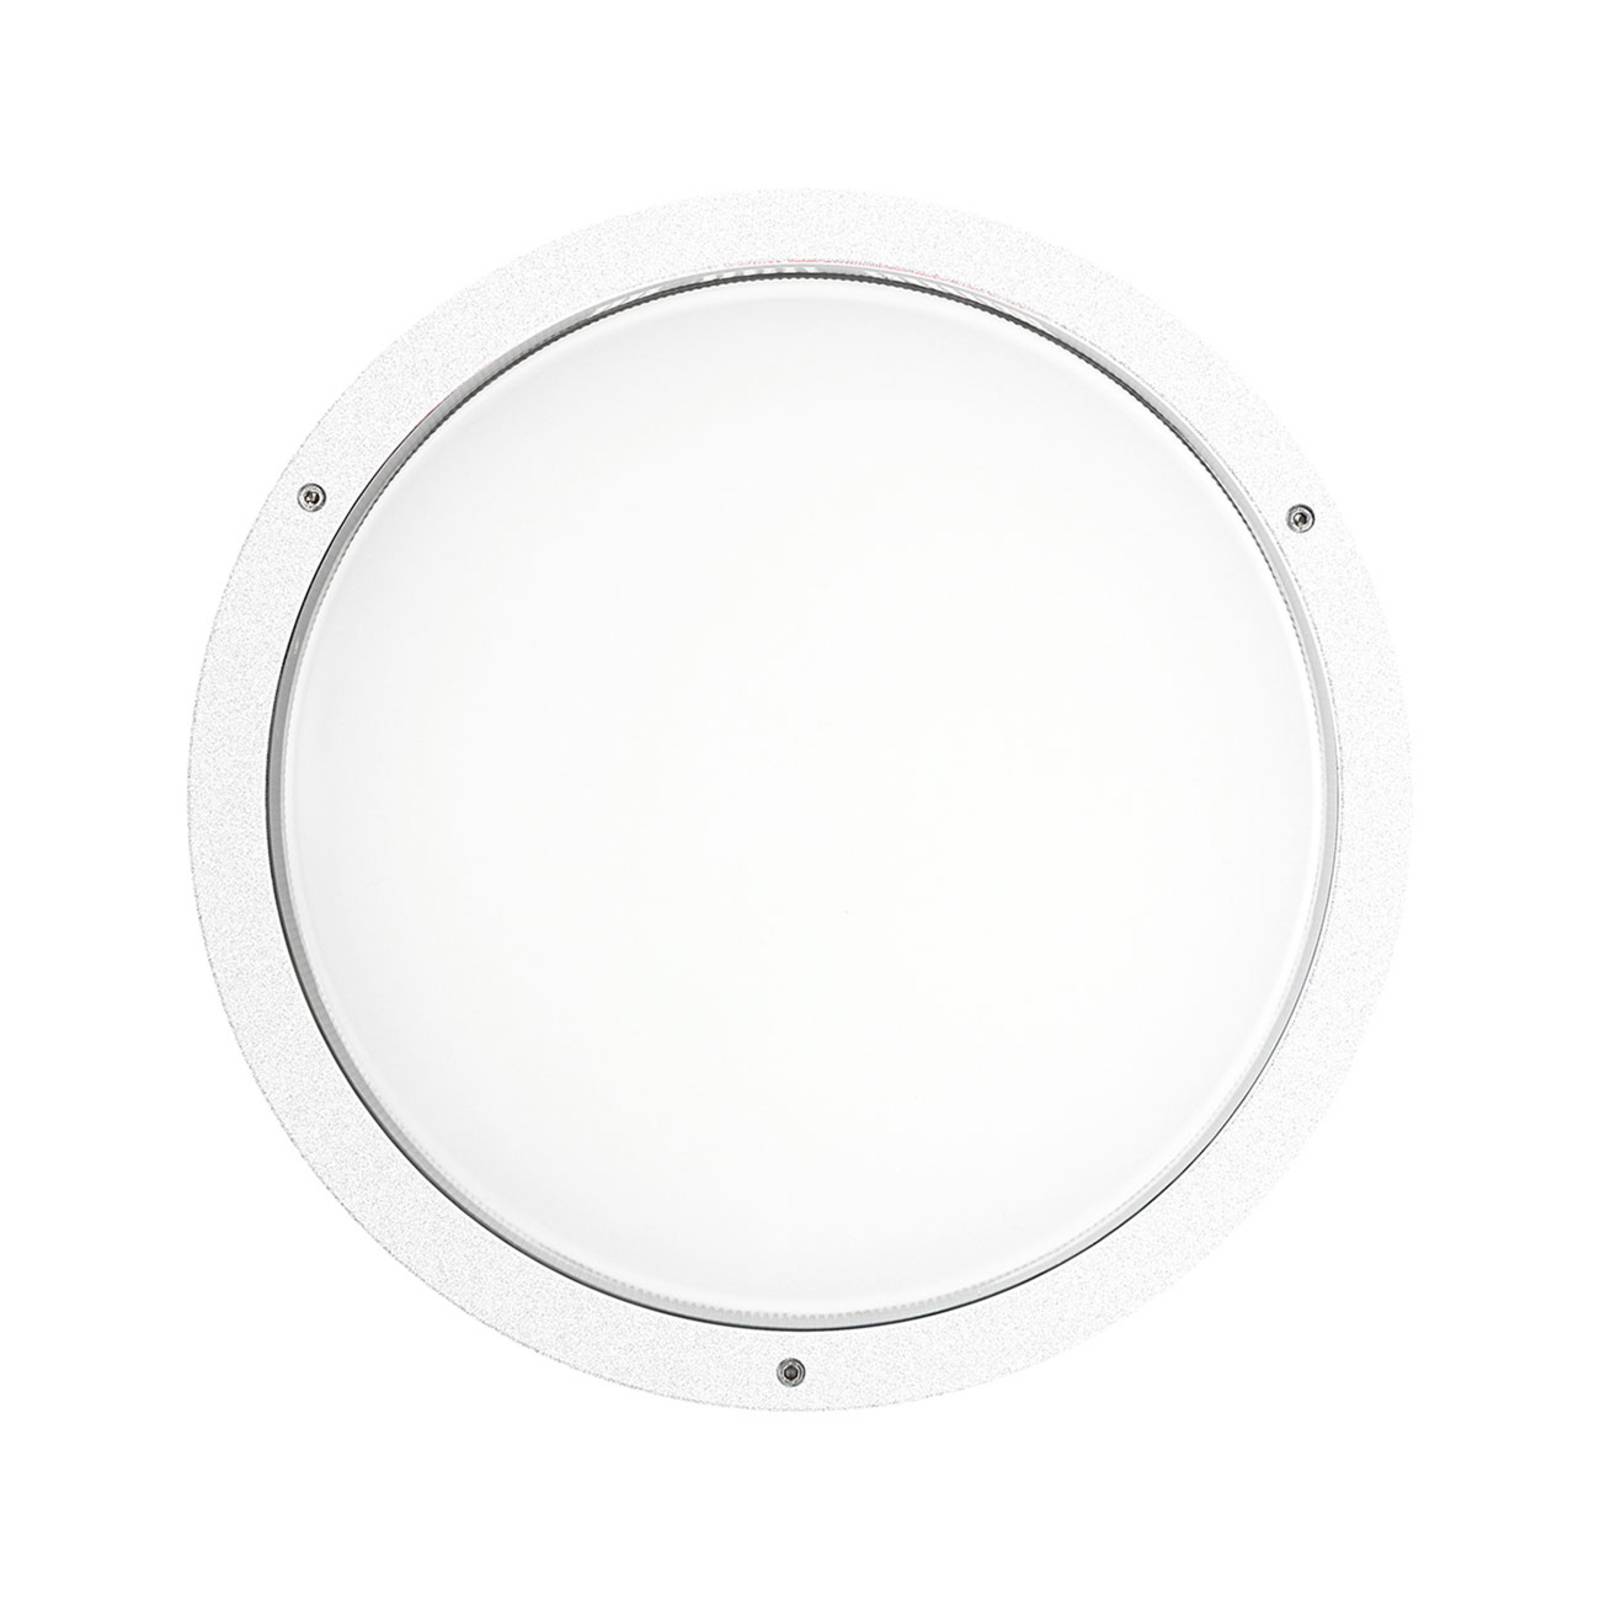 Image of Applique Bliz Round 40 3 000 K blanche dimmable 8018367632347